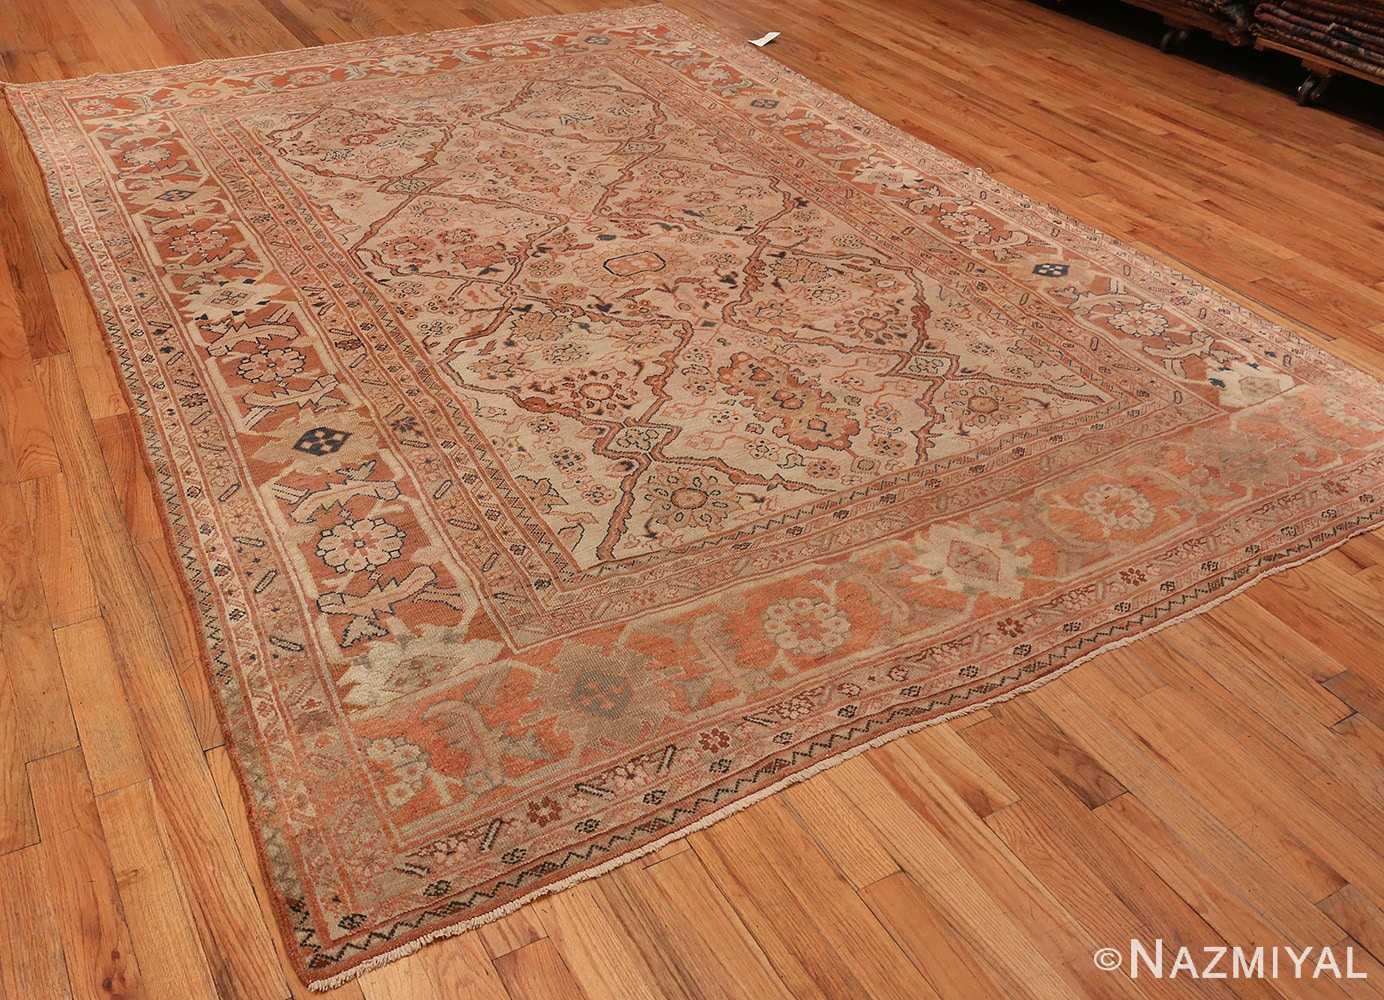 An Over All Picture of Antique Ivory Persian Sultanabad rug #50576 from Nazmiyal Antique Rugs in NYC